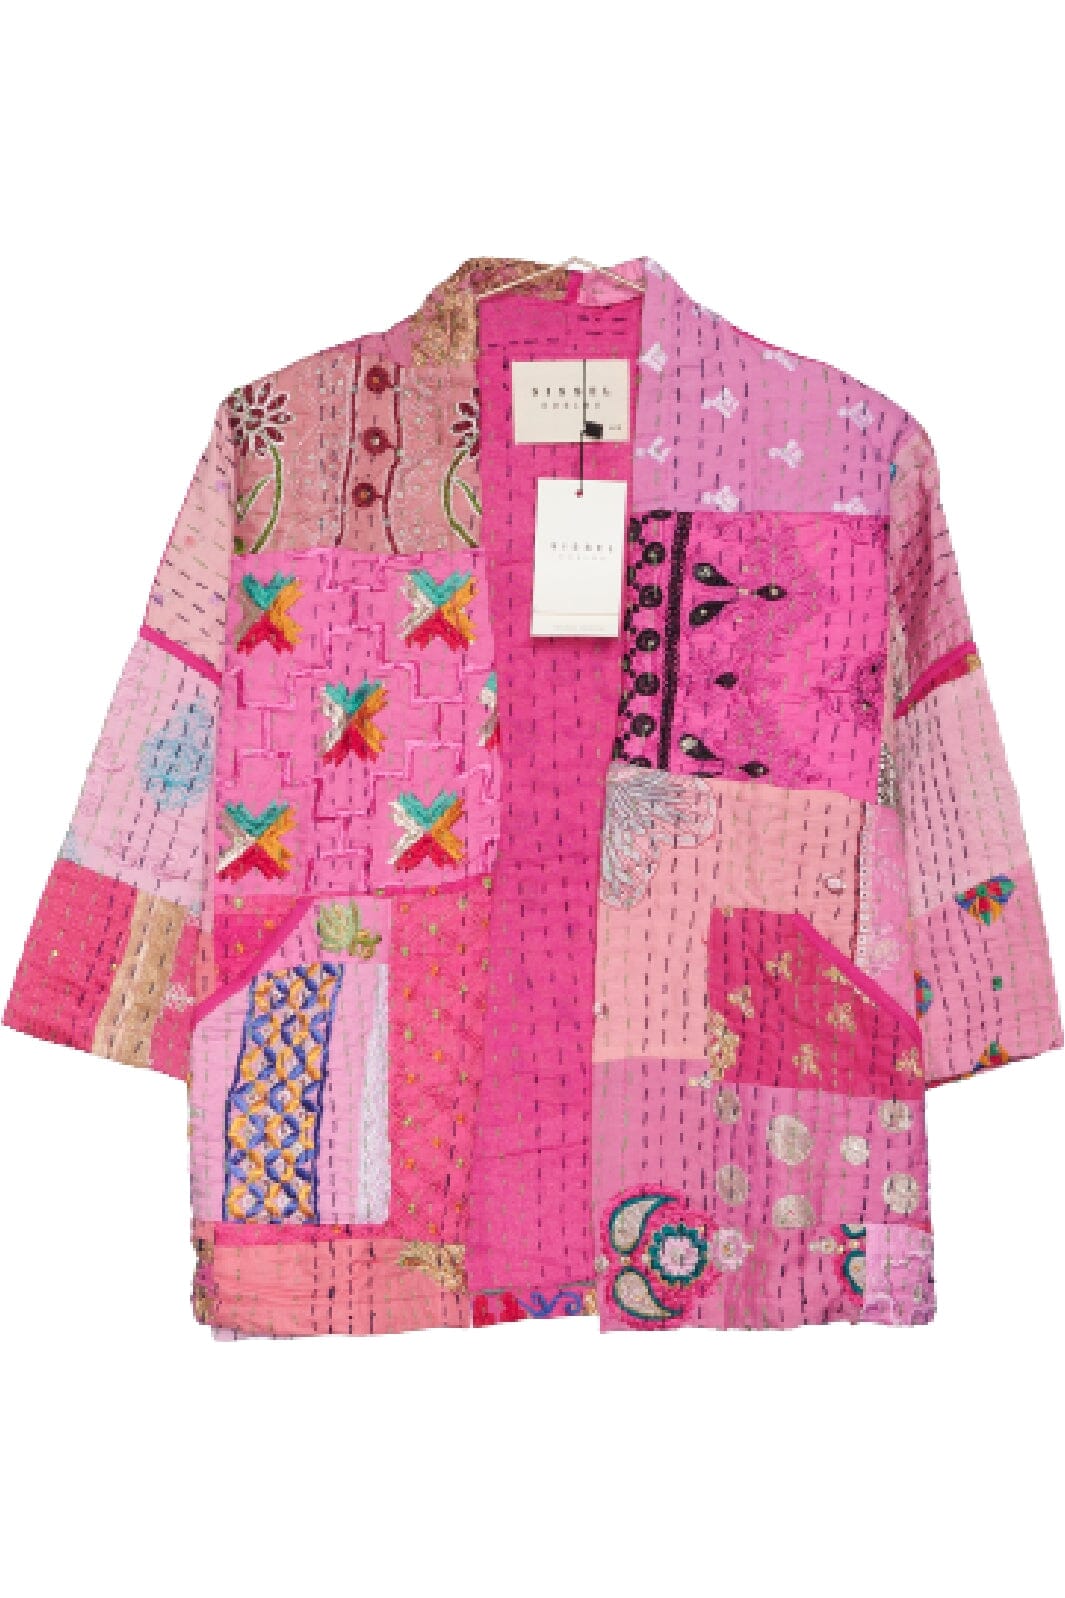 Sissel Edelbo - Tallulah Embroidery Patchwork Jacket,Tallulah Embroidery Patchwork Jacket - No. 193 Jakker 